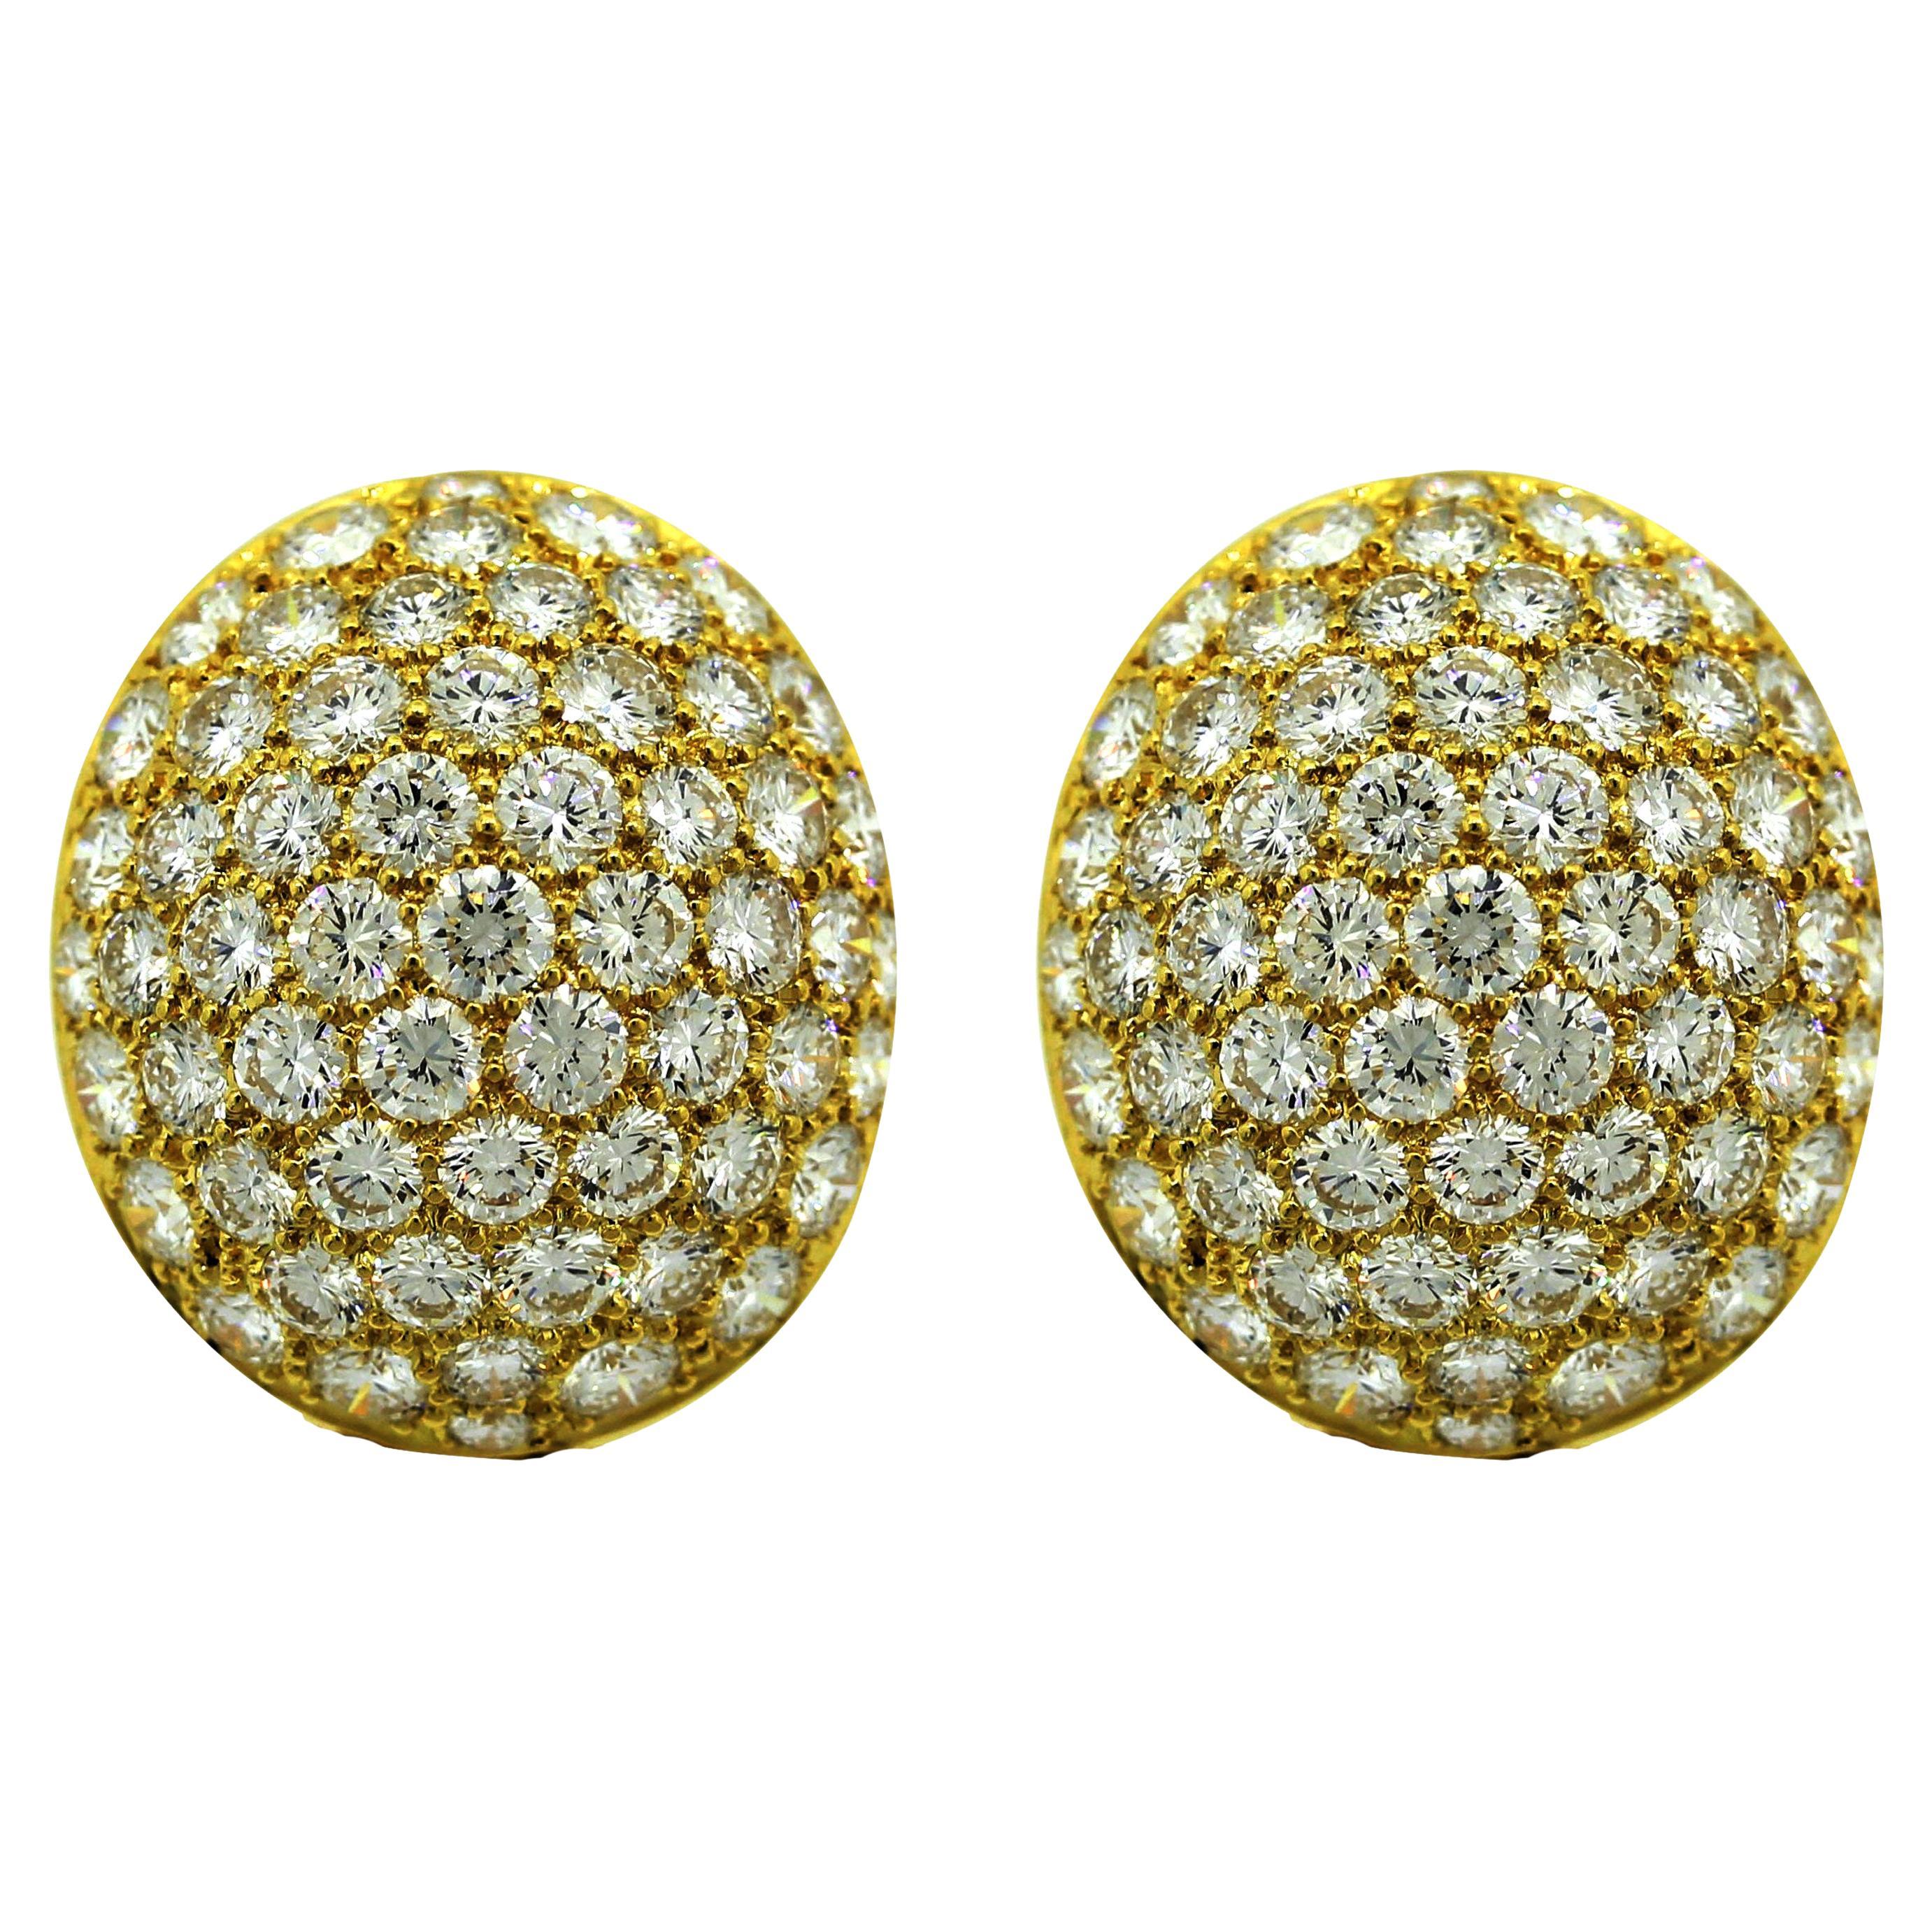 Hammerman Brothers Diamond Cluster Domed Ear clip Earrings For Sale